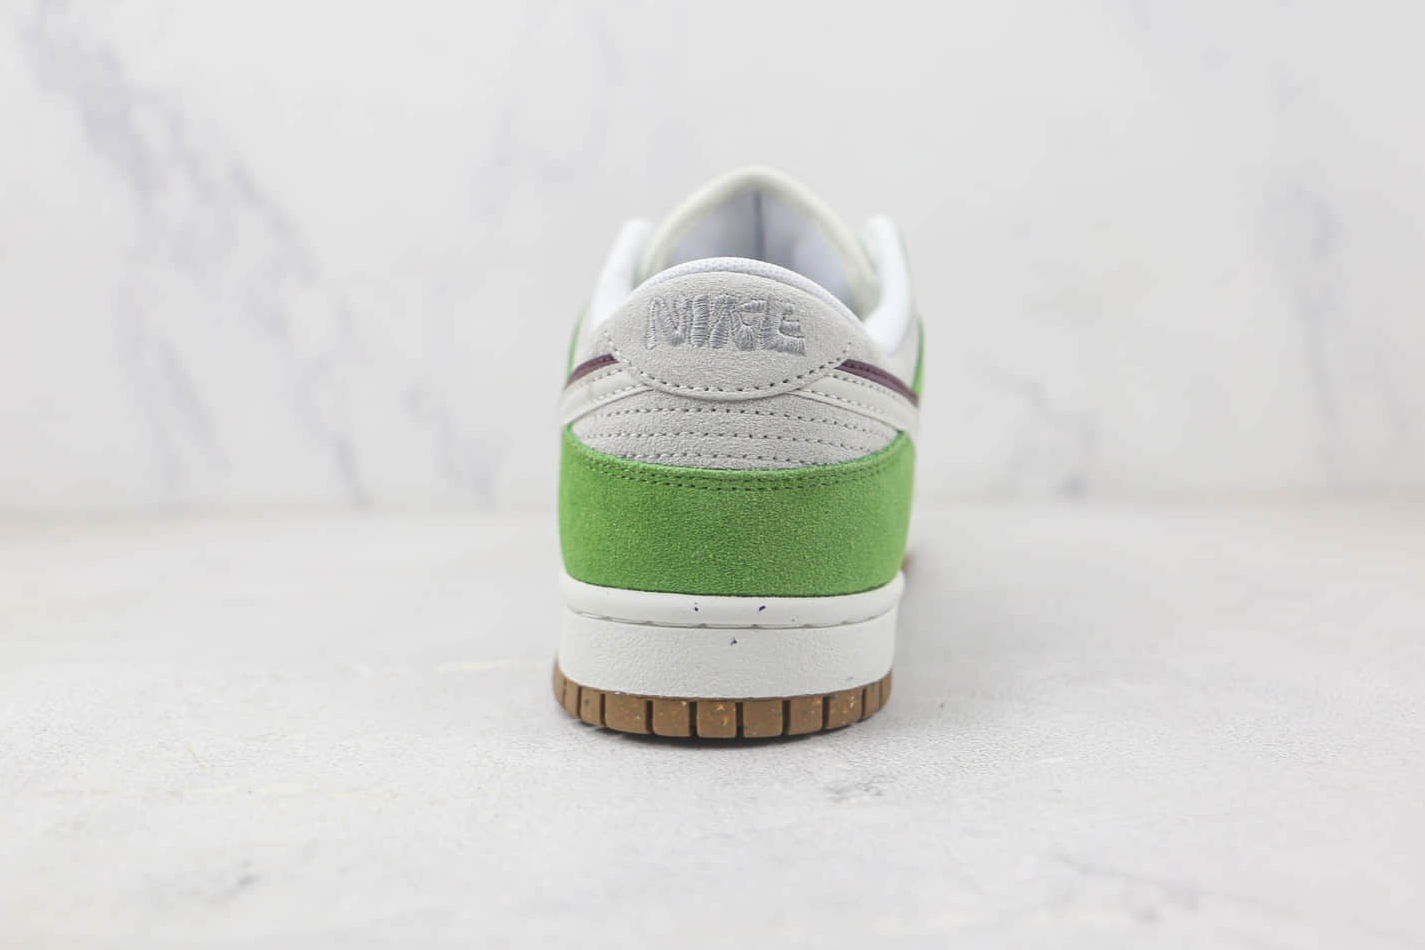 Nike SB Dunk Low 85 - Avocado Green/Brown/White - DD9457-103 - Limited Edition!